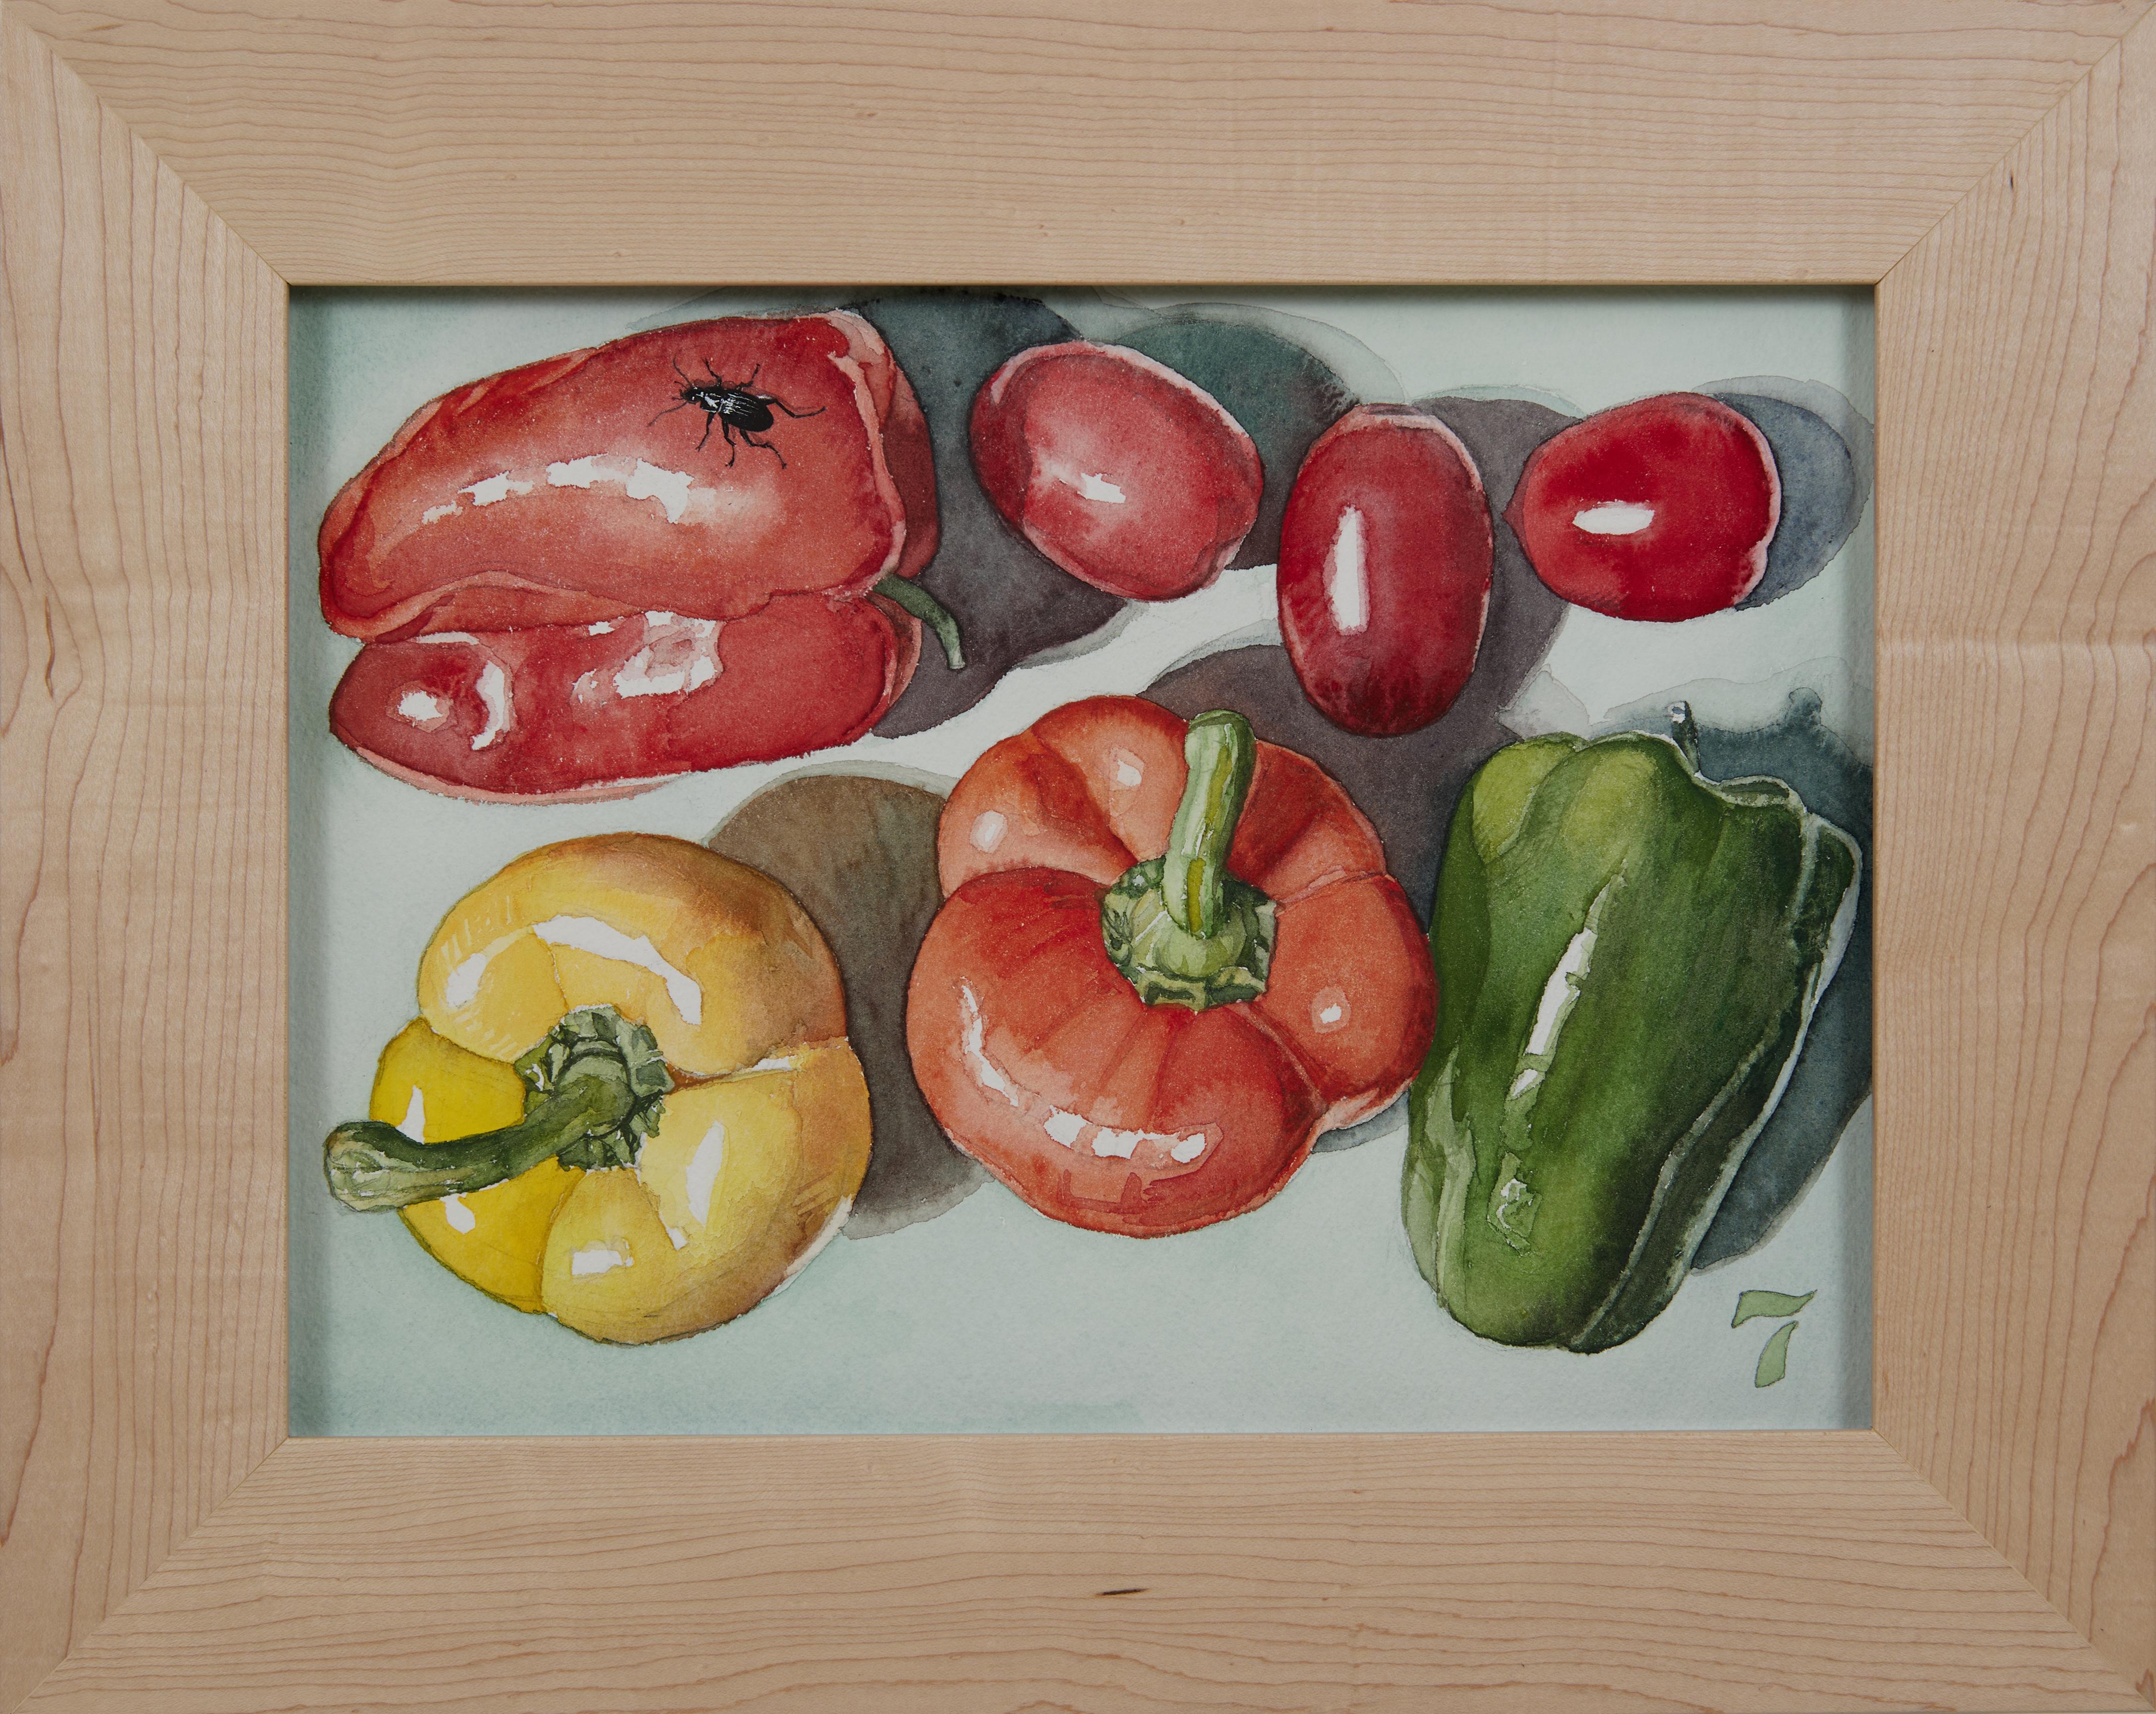 Vegetable Still Life No. 7, Contemporary watercolor by Ohio trompe l'oeil artist - Art by George Mauersberger